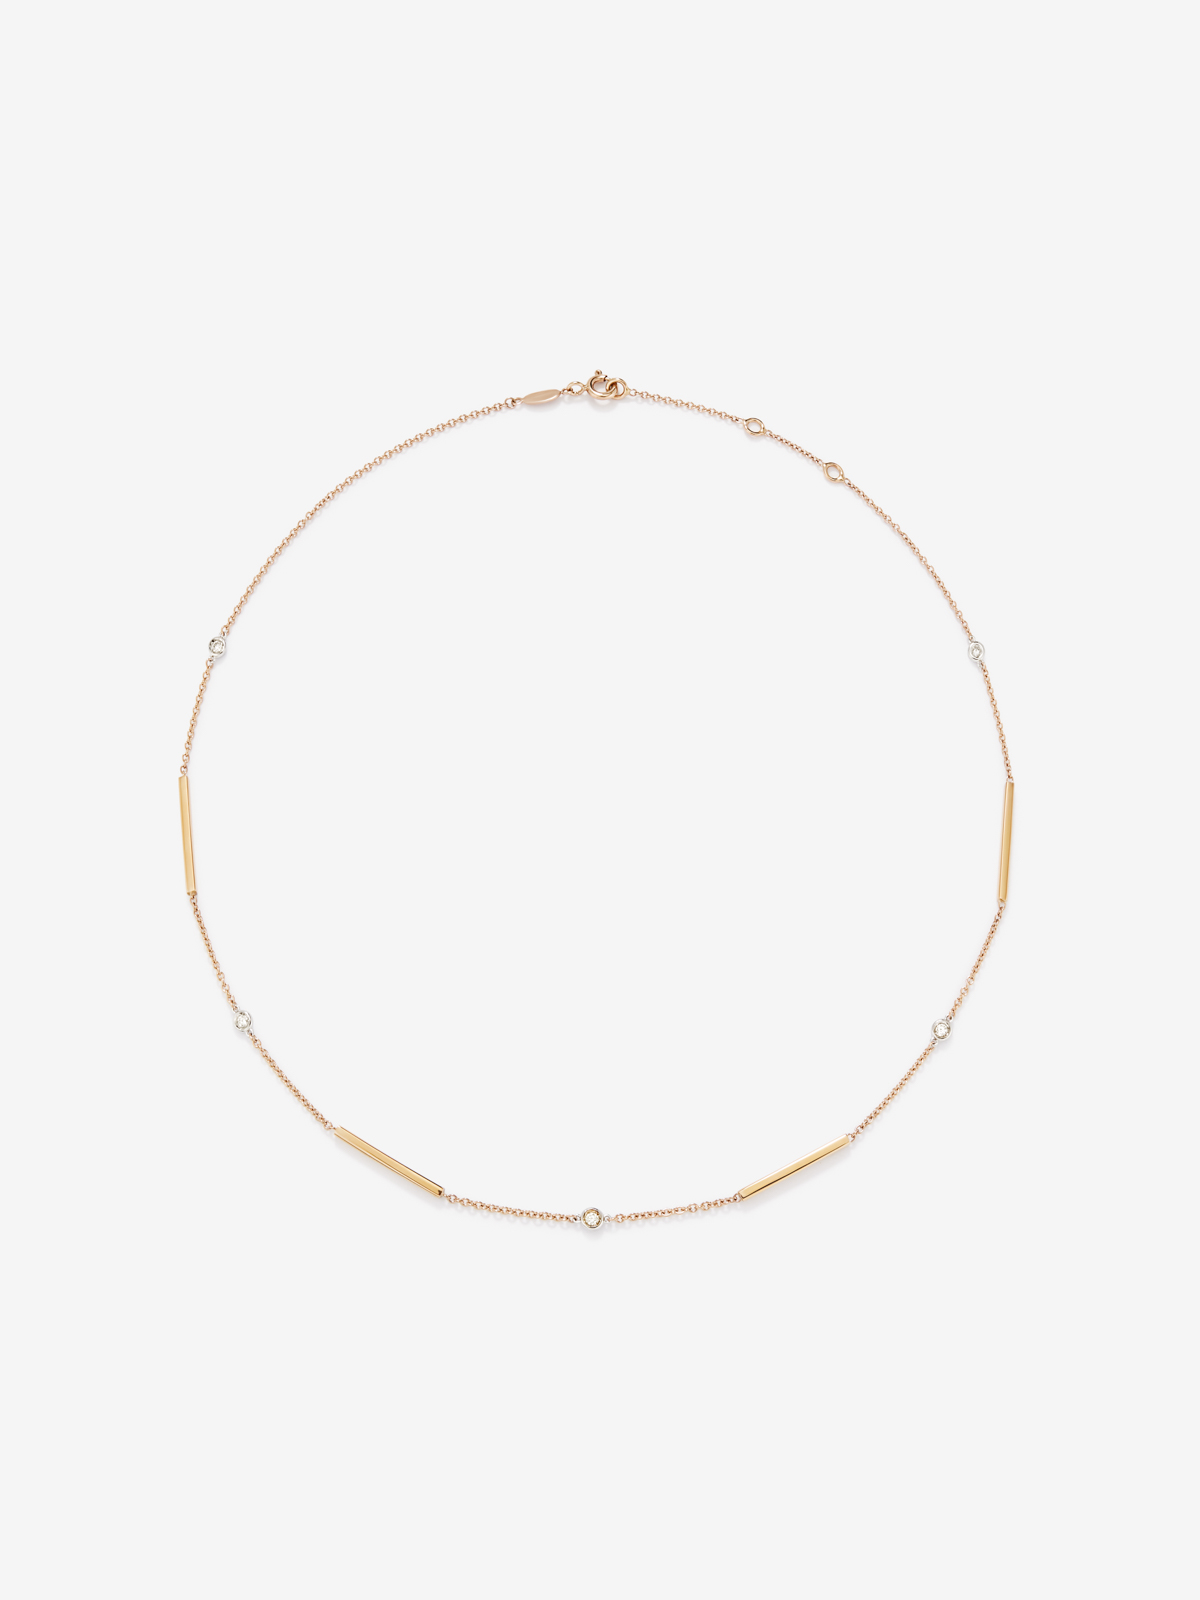 Choker necklace with 18K rose gold bars and diamonds